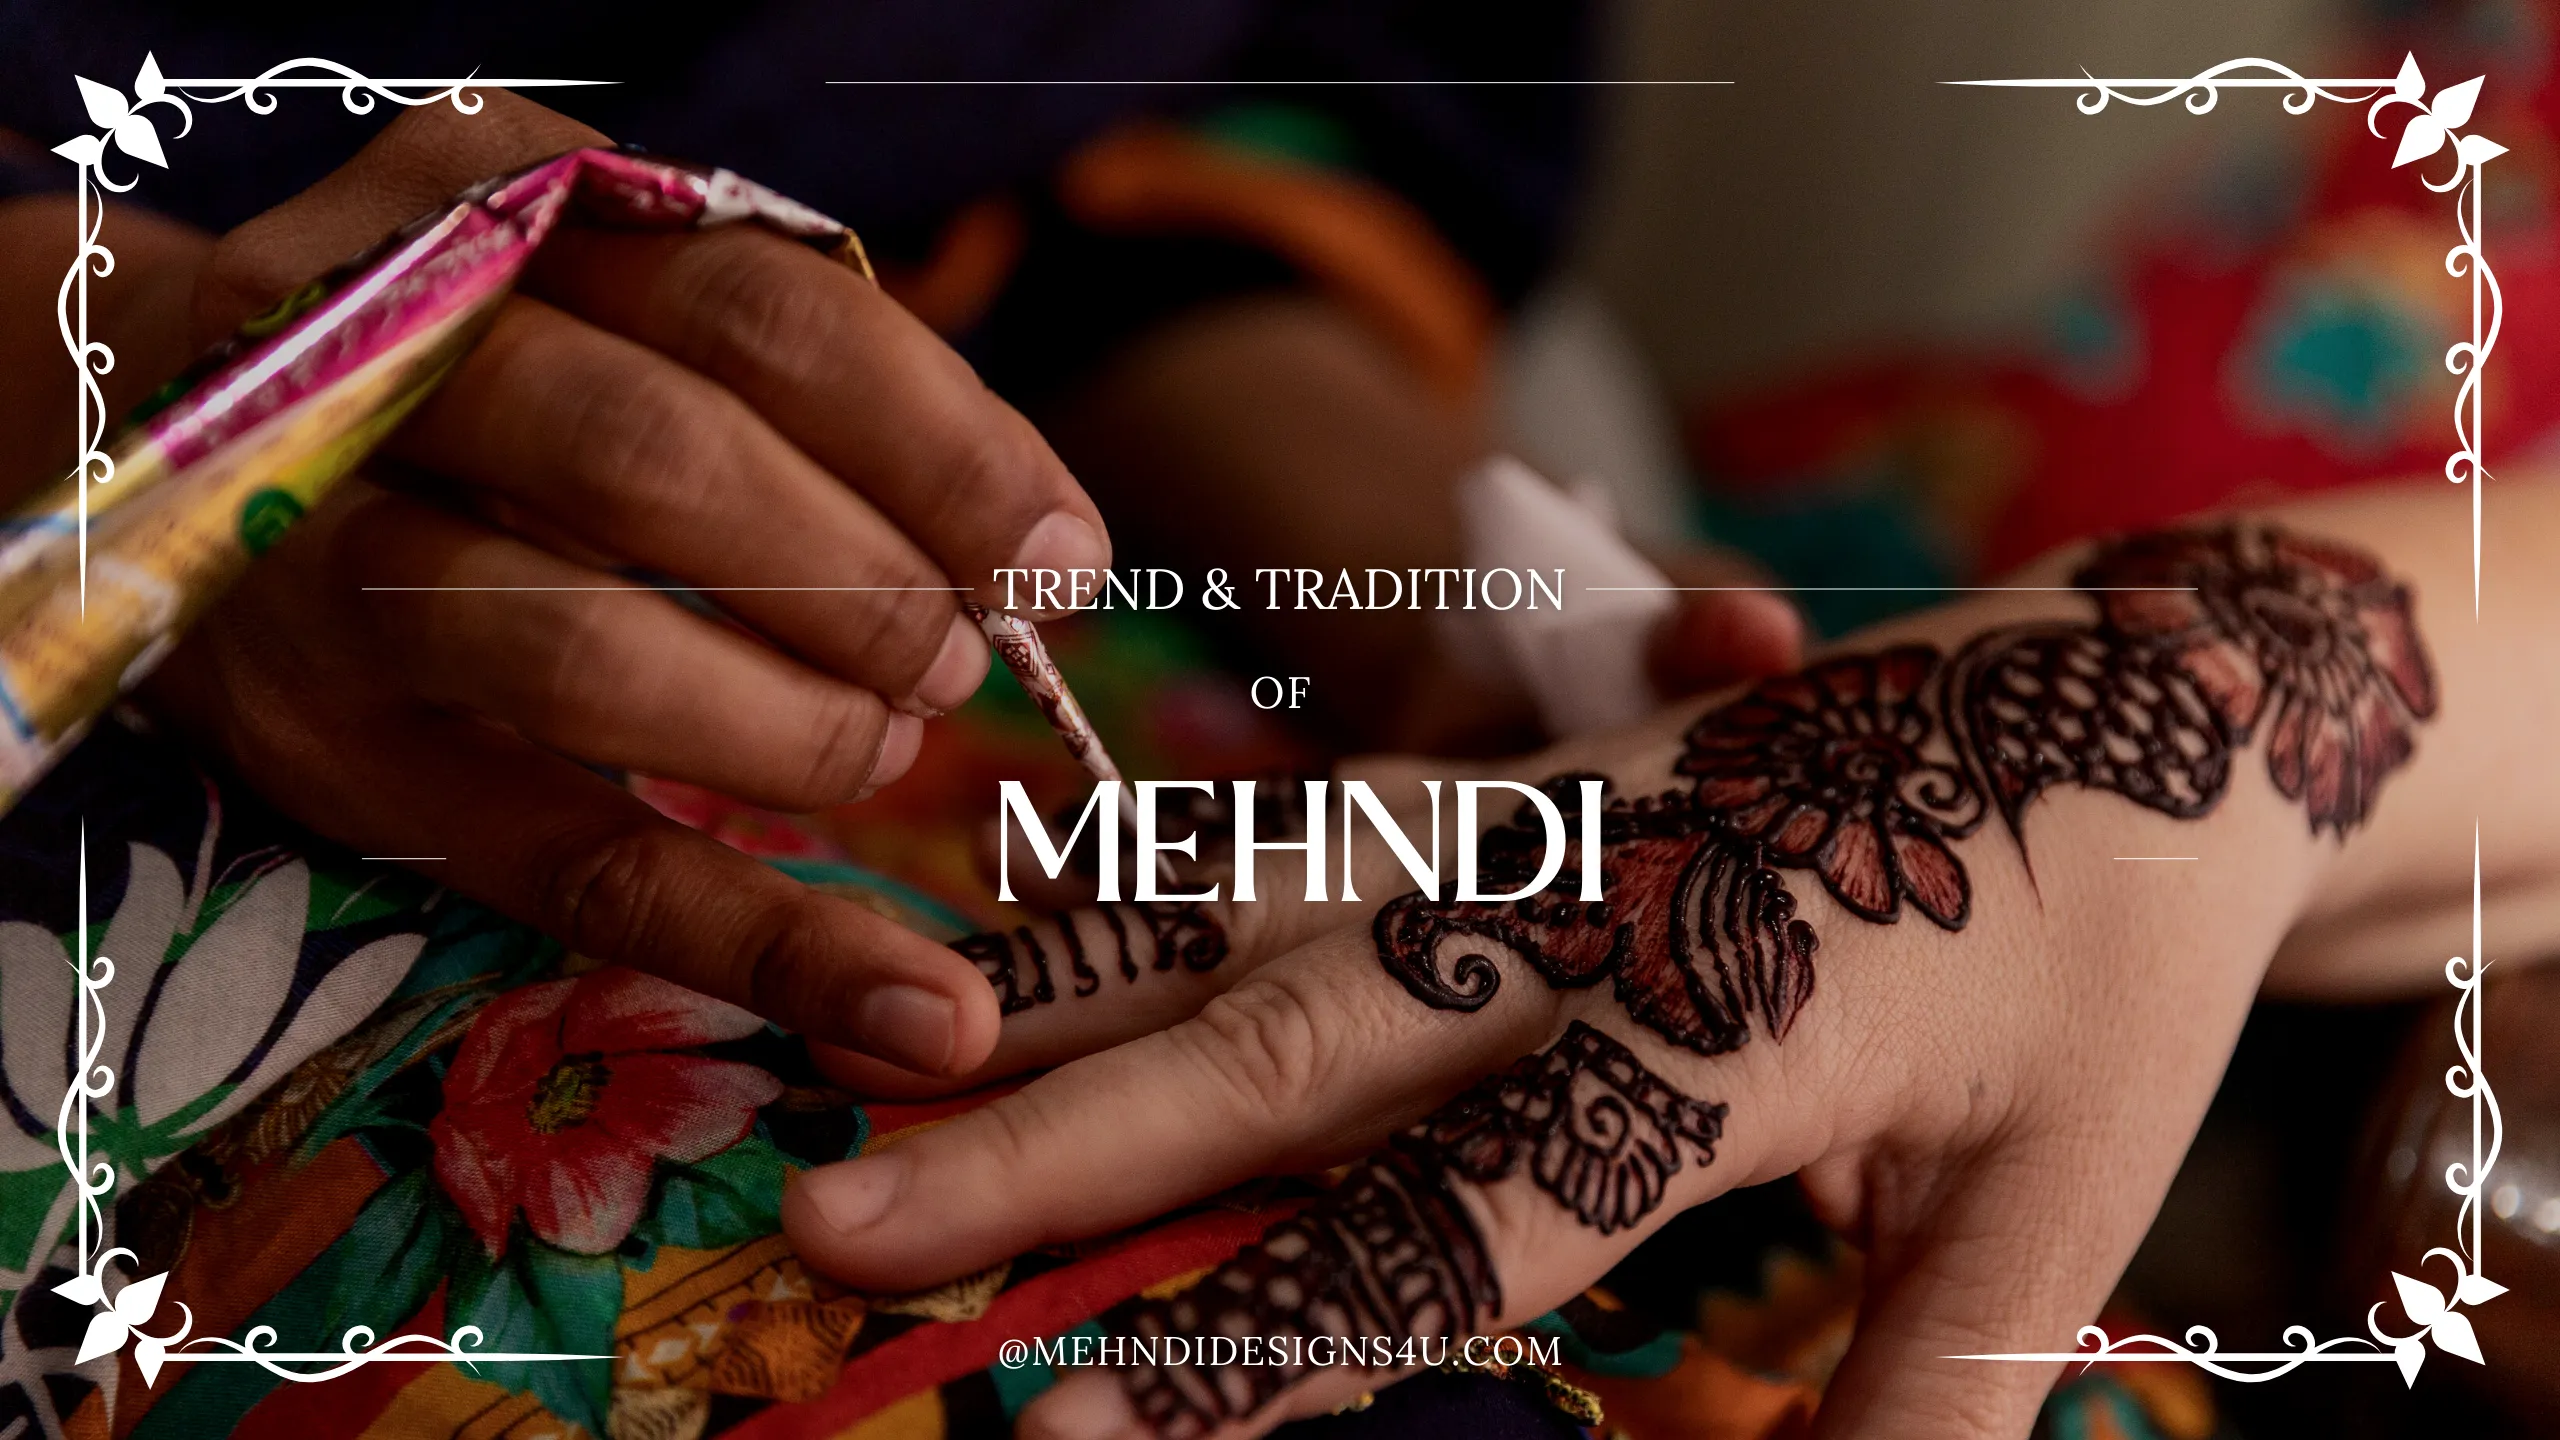 The Tradition and Trends of Mehndi